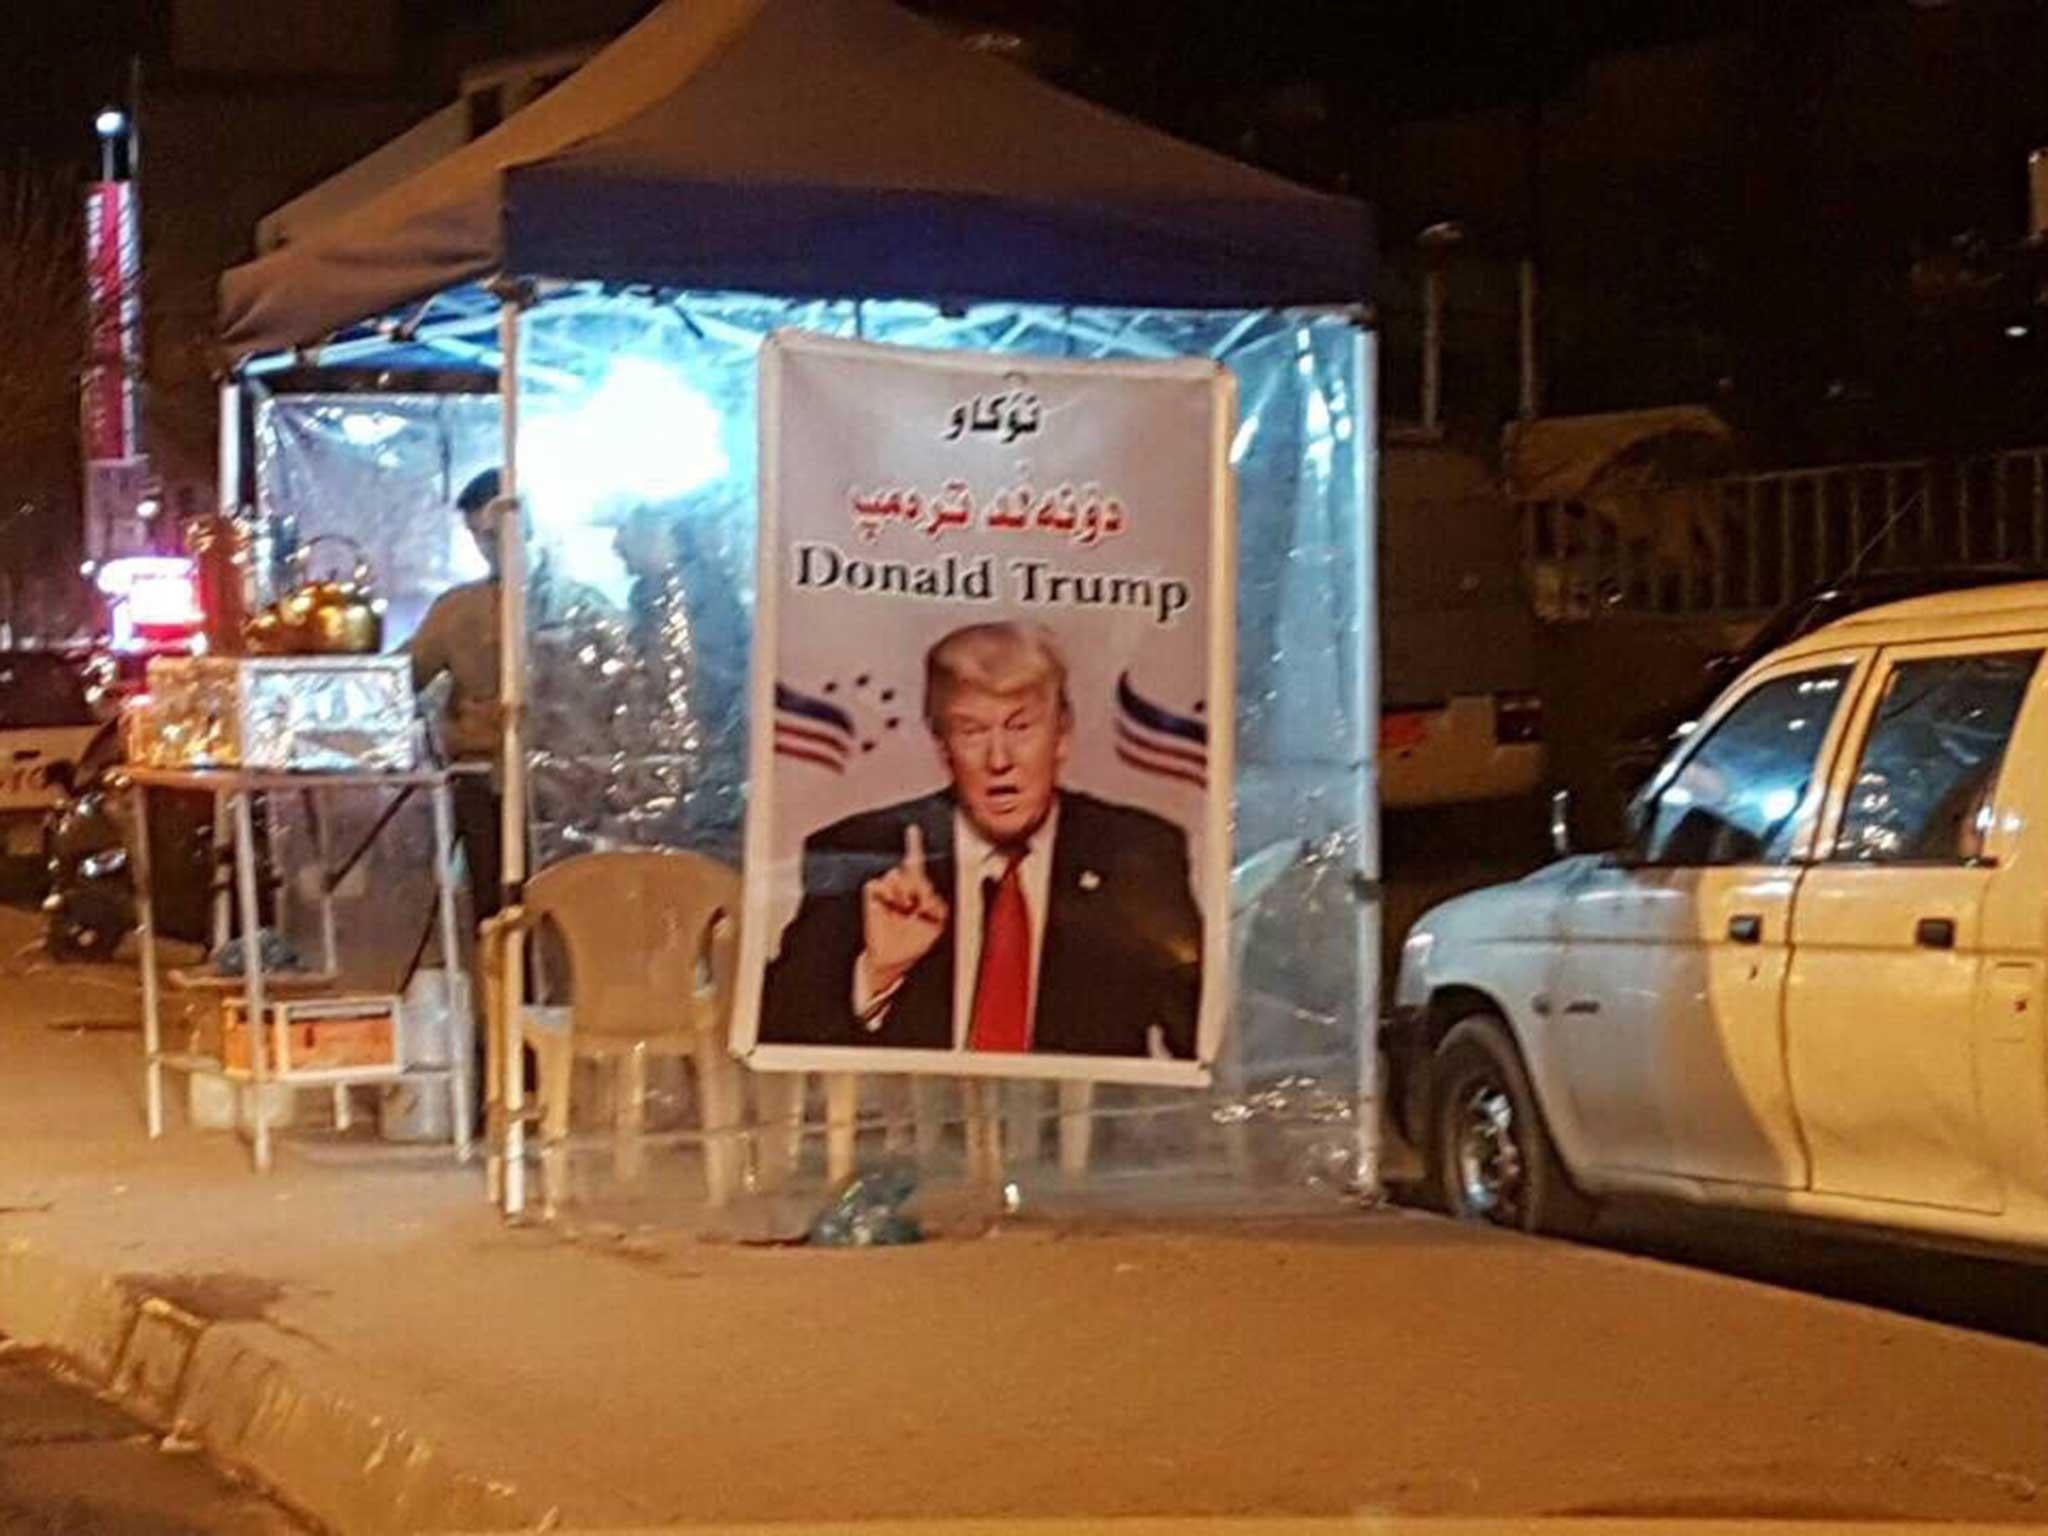 A Trump poster in Sulaymaniyah, Iraq